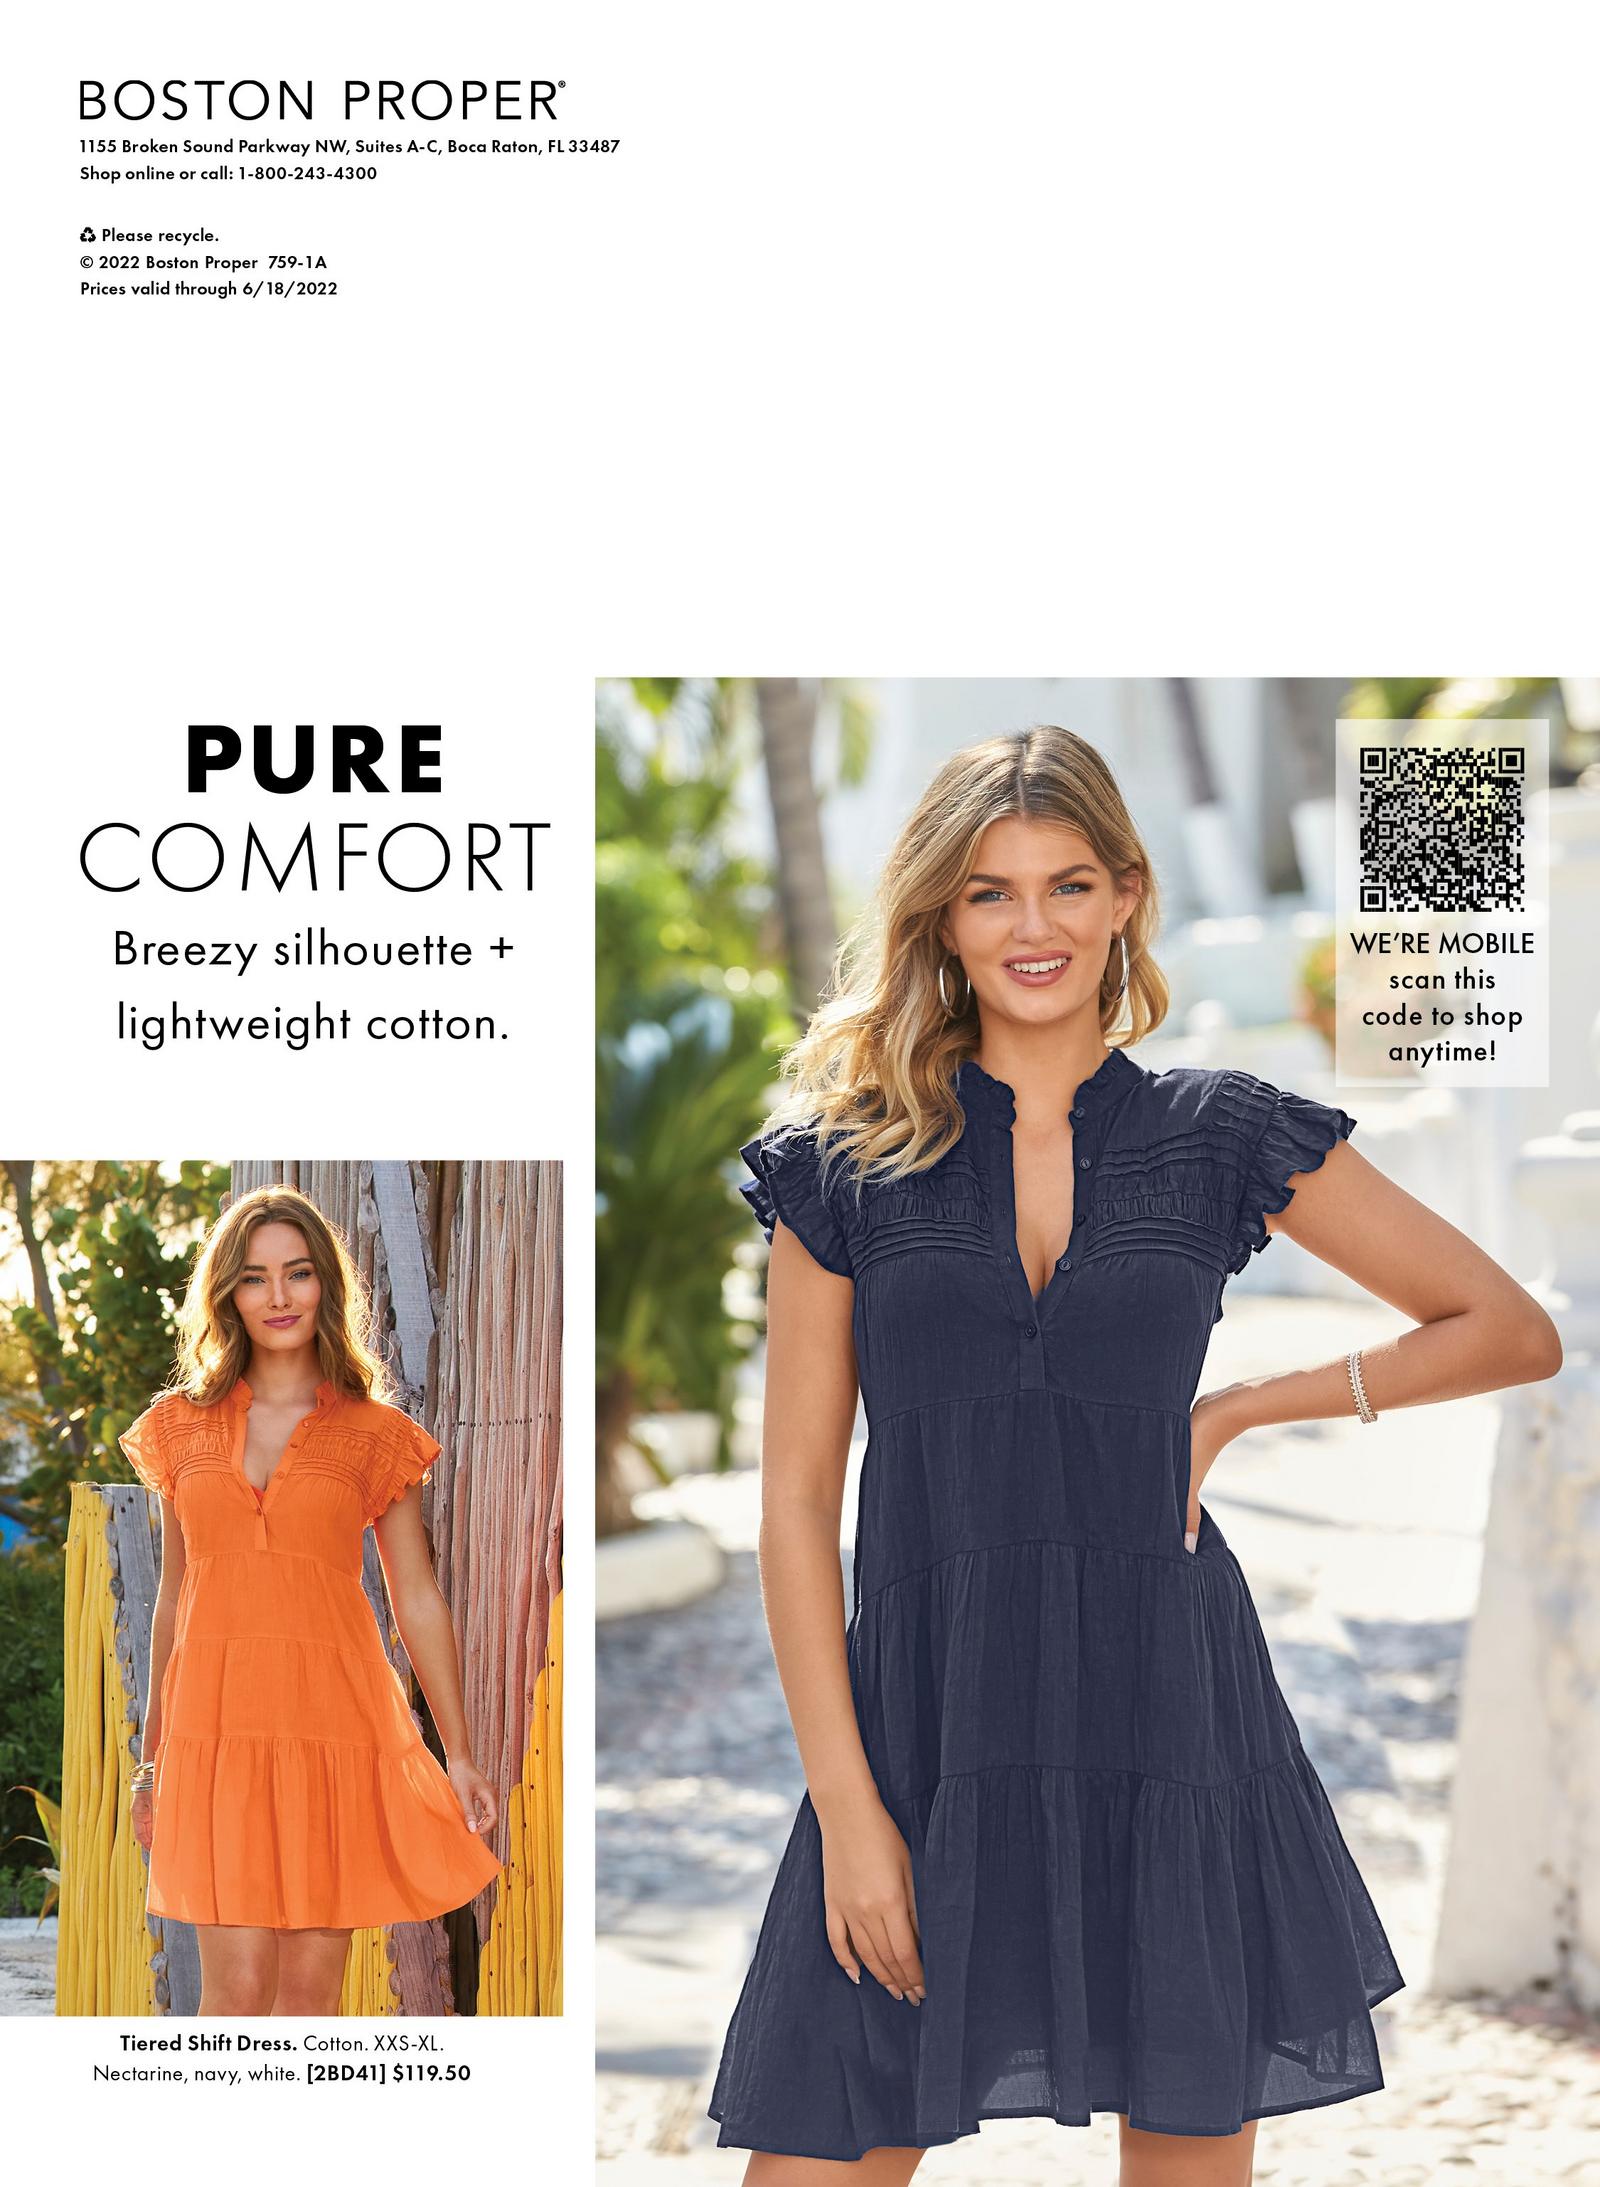 Model is shown wearing the Tiered Shift Dress in orange cotton. Another model is shown wearing the Tiered Shift Dress in cotton navy.